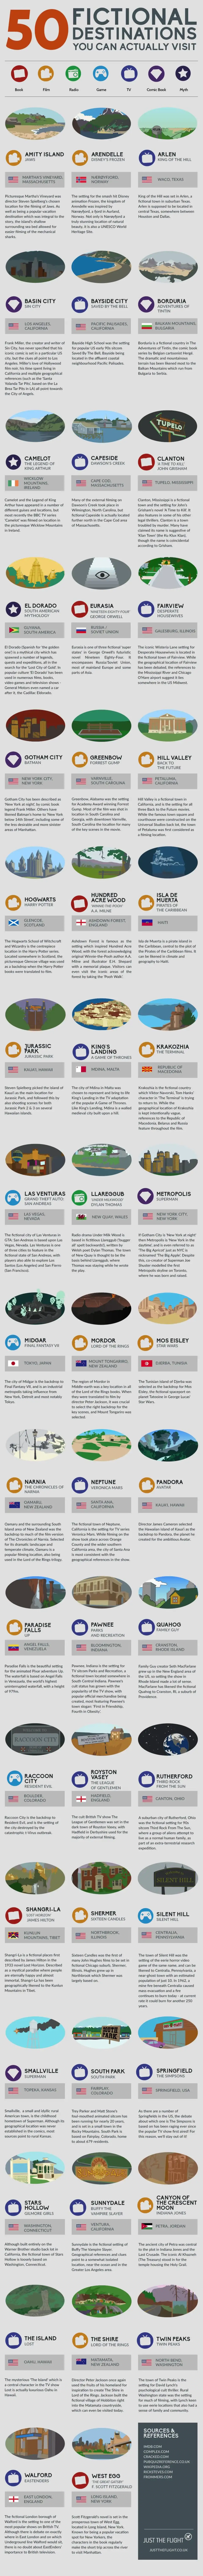 cool fictional places to visit